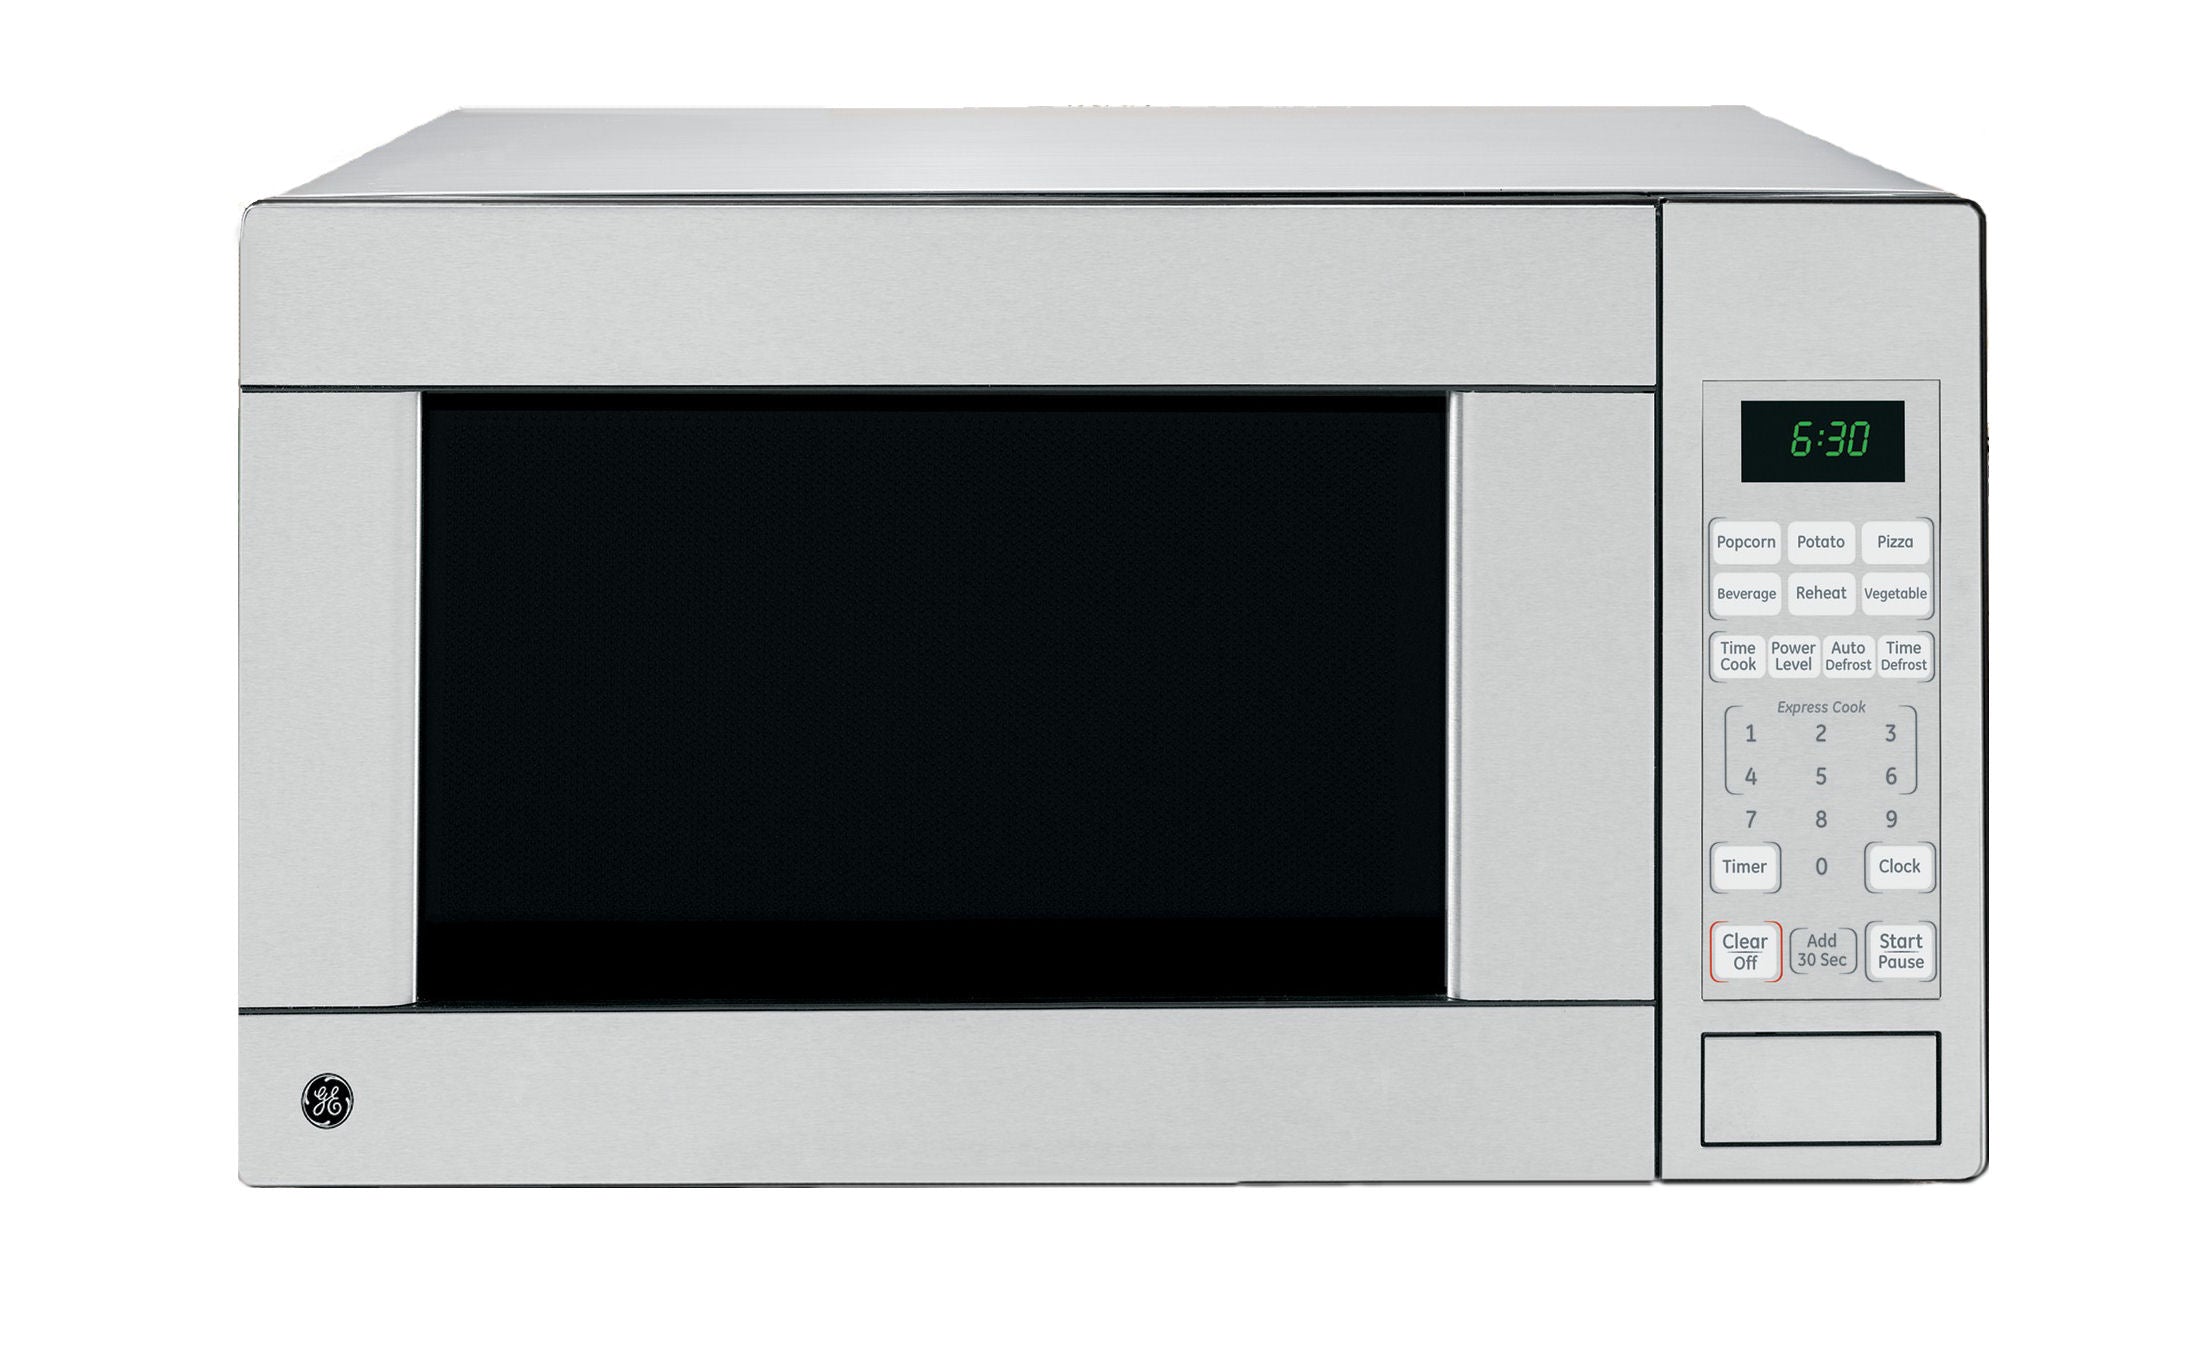 JES1140STC - MICROWAVES OVENS - GE - Countertop - Stainless Steel - Open Box - MICROWAVES OVENS - BonPrix Électroménagers